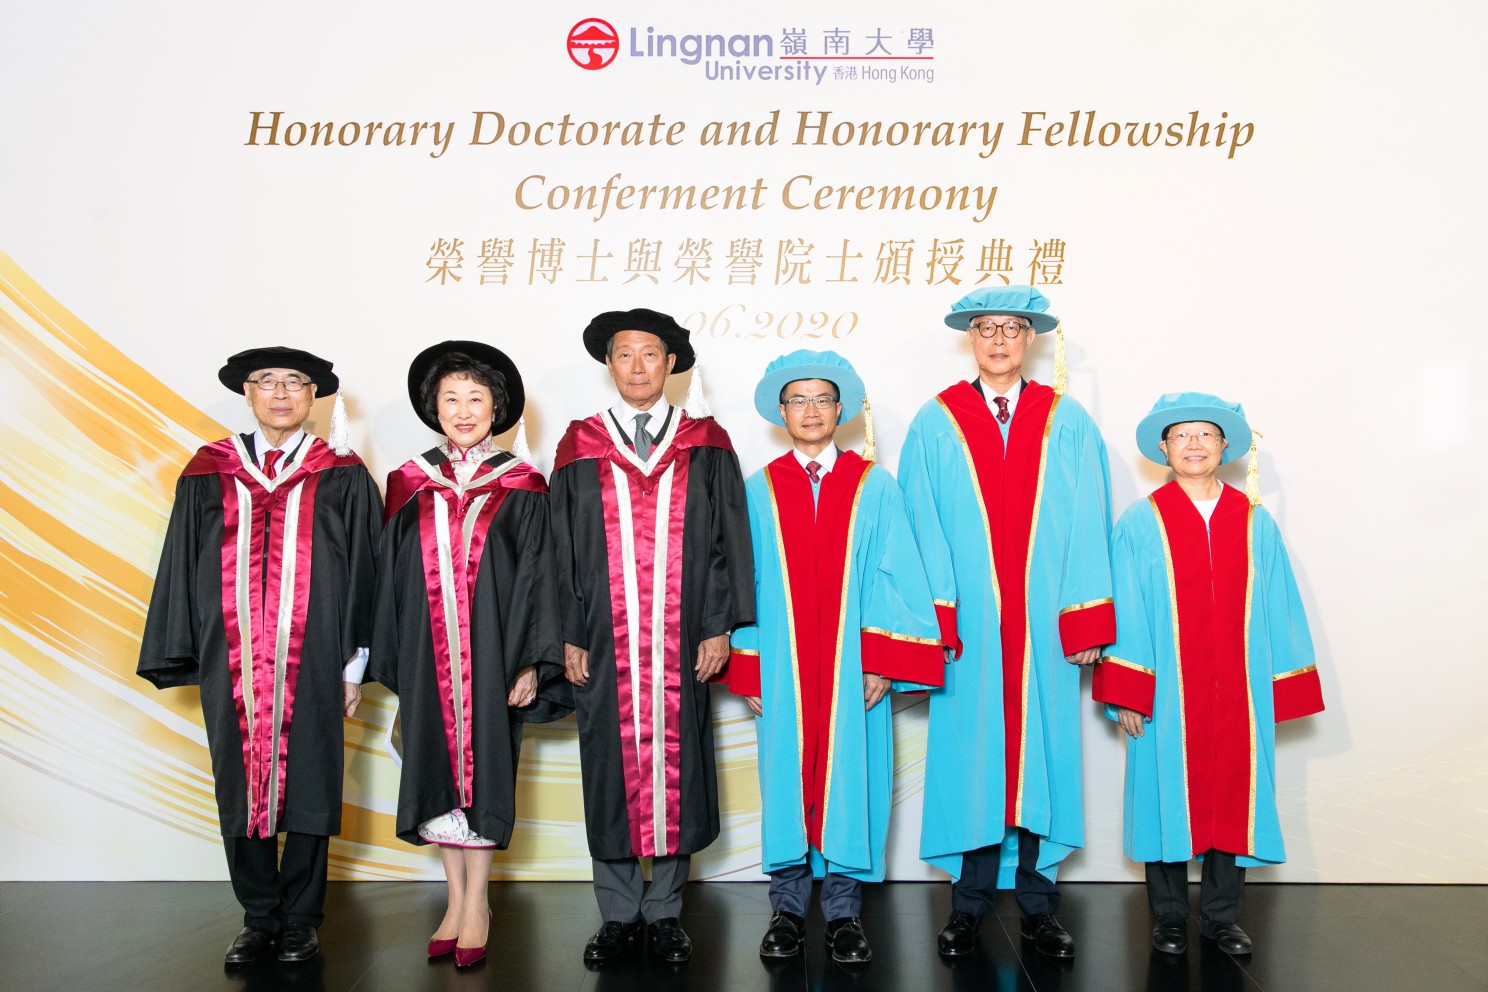 Honorary Doctorates and Honorary Fellowships